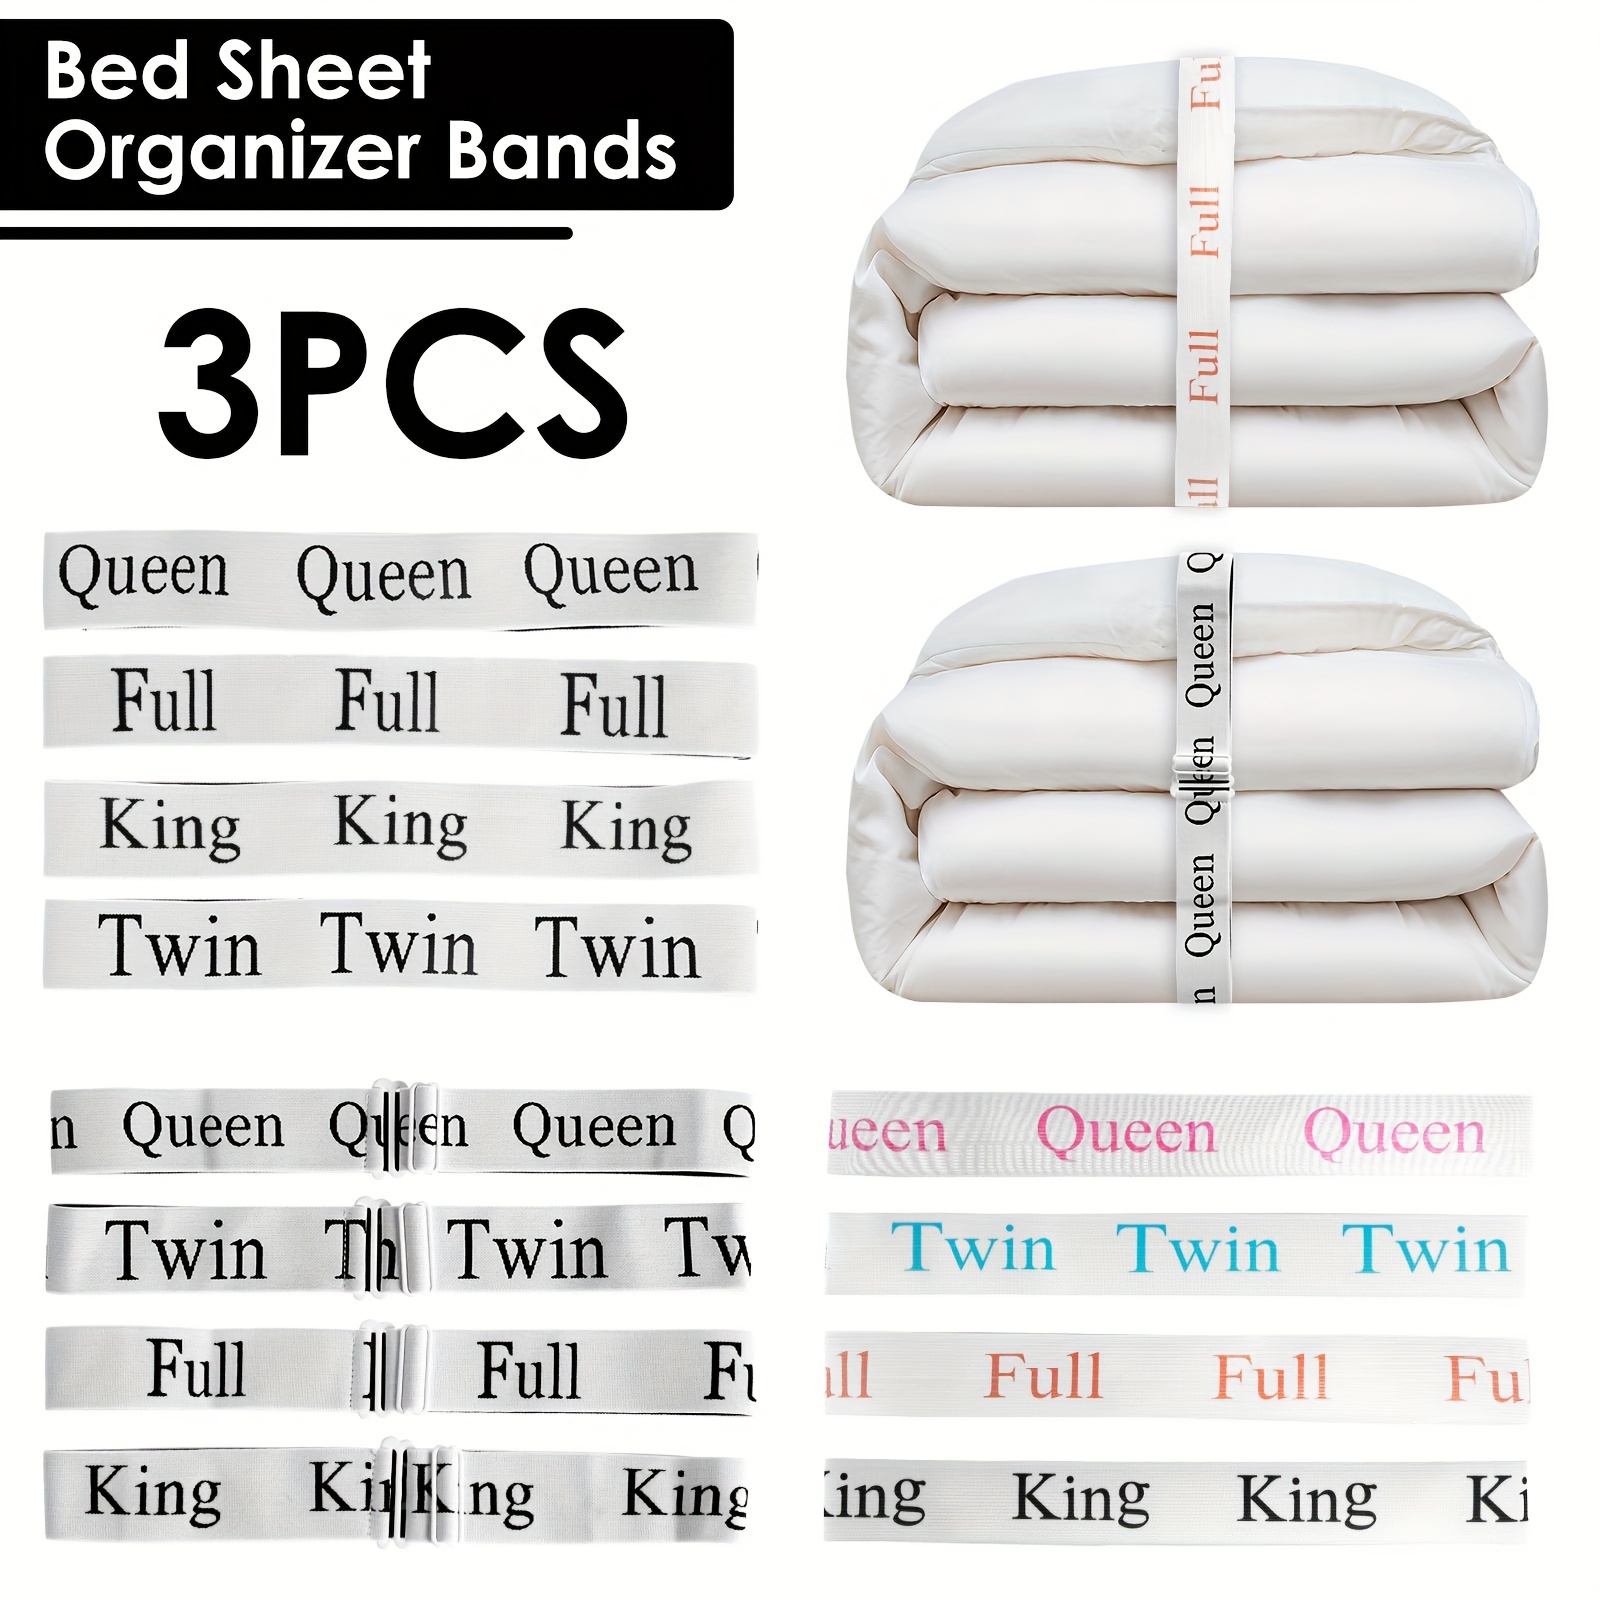 

12pcs Bed Sheet Organizer Bands Set Elastic Polyester Bedding Straps King Full Twin Queen Label Polyester Bed Sheet Organizer Straps Portable Bed Sheet Fastener Bands For Foldable Bedsheet Pillow Case